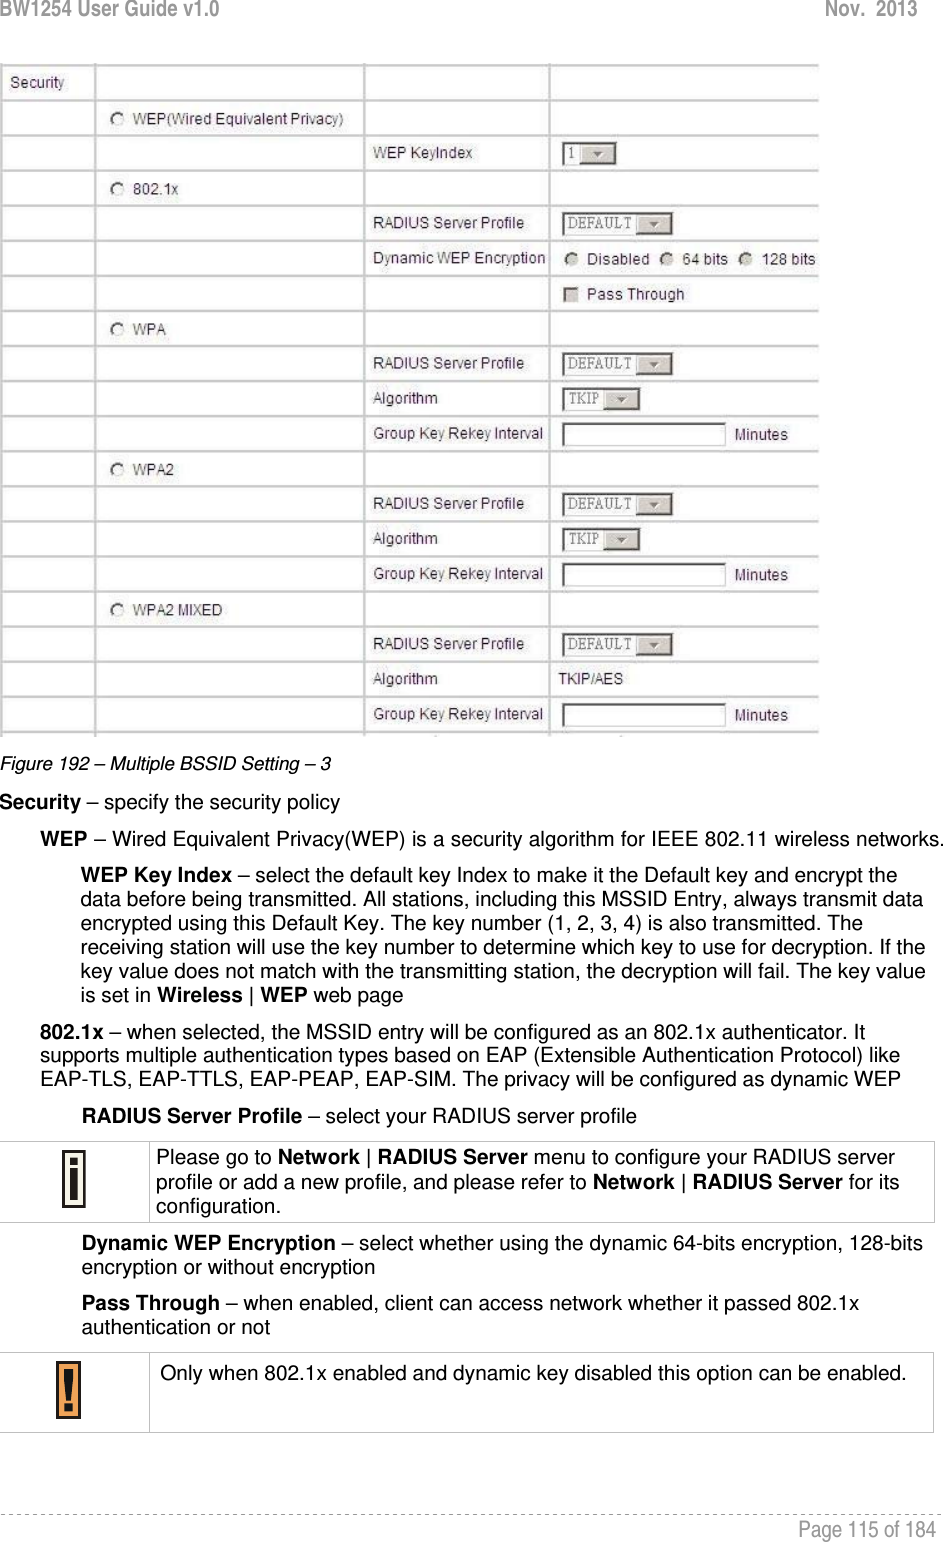 BW1254 User Guide v1.0  Nov.  2013     Page 115 of 184    Figure 192 – Multiple BSSID Setting – 3 Security – specify the security policy WEP – Wired Equivalent Privacy(WEP) is a security algorithm for IEEE 802.11 wireless networks. WEP Key Index – select the default key Index to make it the Default key and encrypt the data before being transmitted. All stations, including this MSSID Entry, always transmit data encrypted using this Default Key. The key number (1, 2, 3, 4) is also transmitted. The receiving station will use the key number to determine which key to use for decryption. If the key value does not match with the transmitting station, the decryption will fail. The key value is set in Wireless | WEP web page 802.1x – when selected, the MSSID entry will be configured as an 802.1x authenticator. It supports multiple authentication types based on EAP (Extensible Authentication Protocol) like EAP-TLS, EAP-TTLS, EAP-PEAP, EAP-SIM. The privacy will be configured as dynamic WEP RADIUS Server Profile – select your RADIUS server profile  Please go to Network | RADIUS Server menu to configure your RADIUS server profile or add a new profile, and please refer to Network | RADIUS Server for its configuration. Dynamic WEP Encryption – select whether using the dynamic 64-bits encryption, 128-bits encryption or without encryption Pass Through – when enabled, client can access network whether it passed 802.1x authentication or not  Only when 802.1x enabled and dynamic key disabled this option can be enabled.  